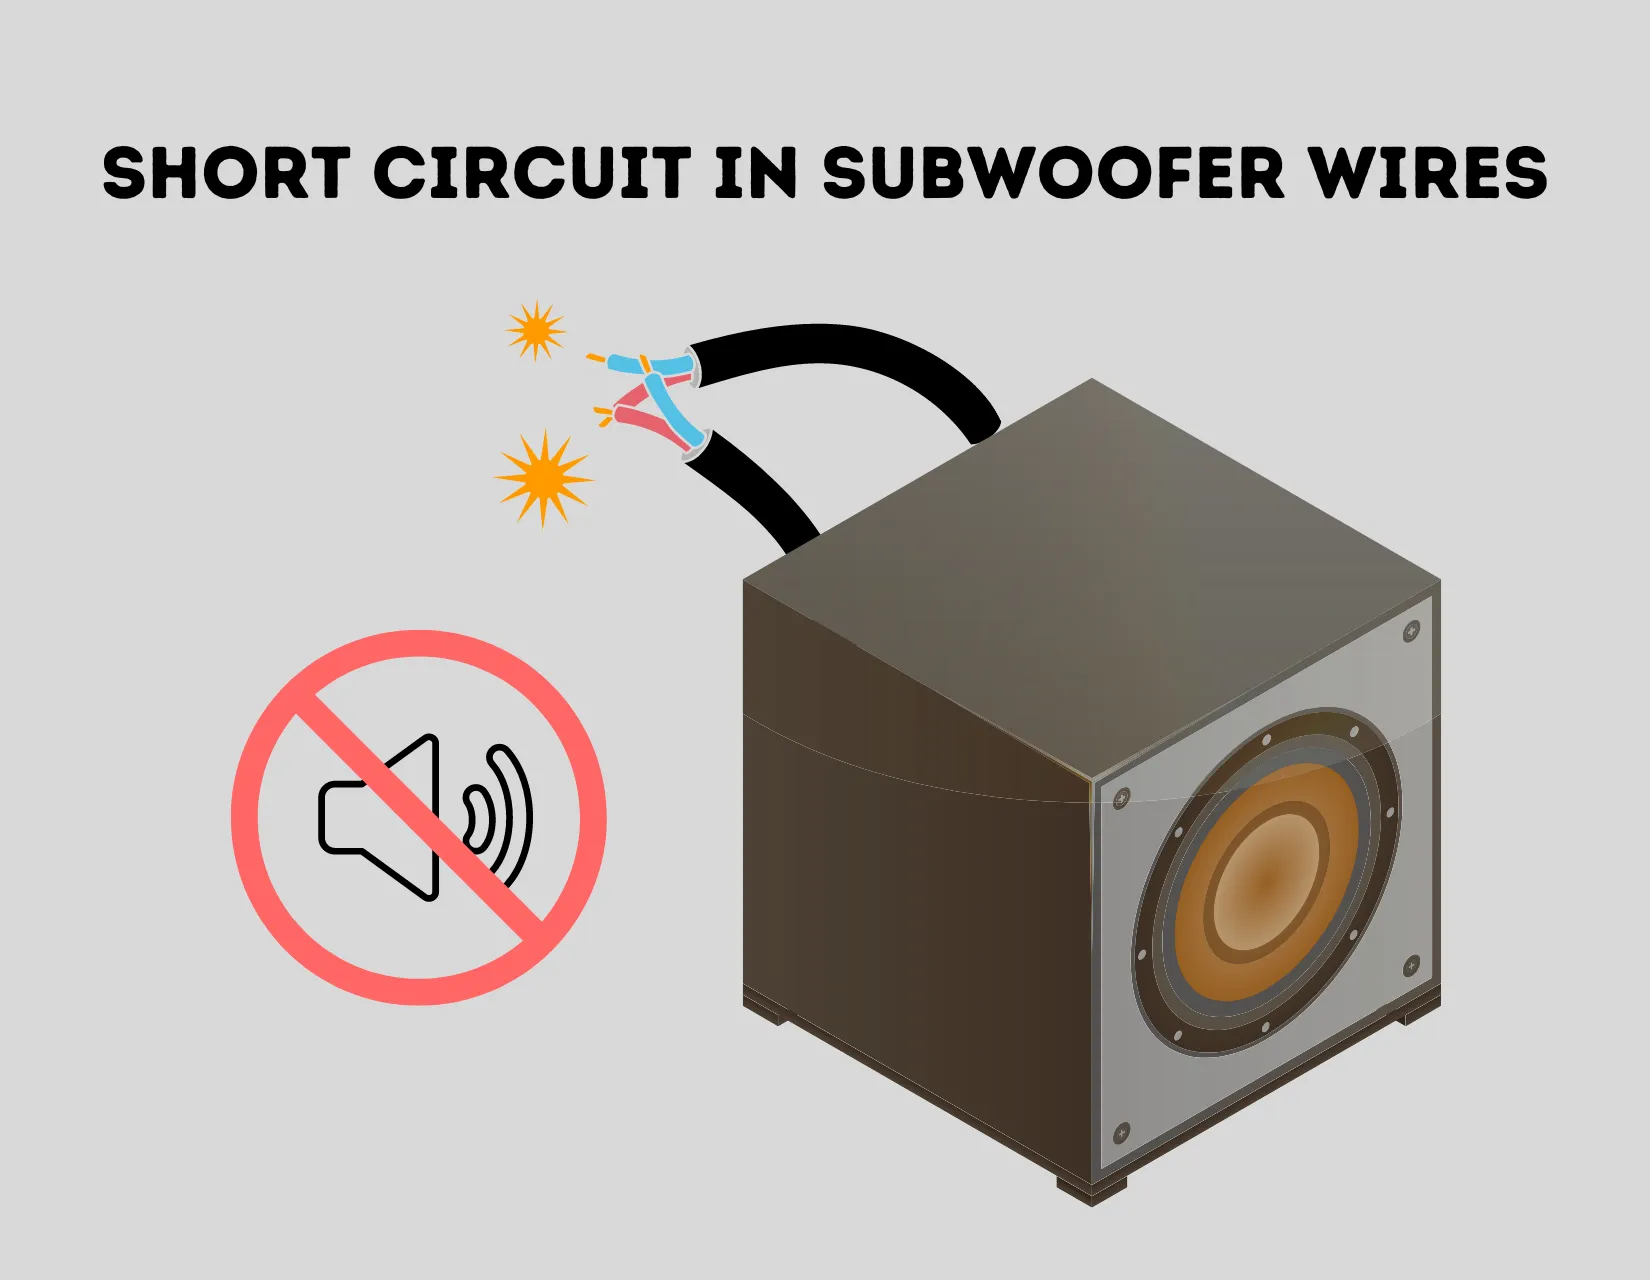 Short Circuit in subwoofer wires